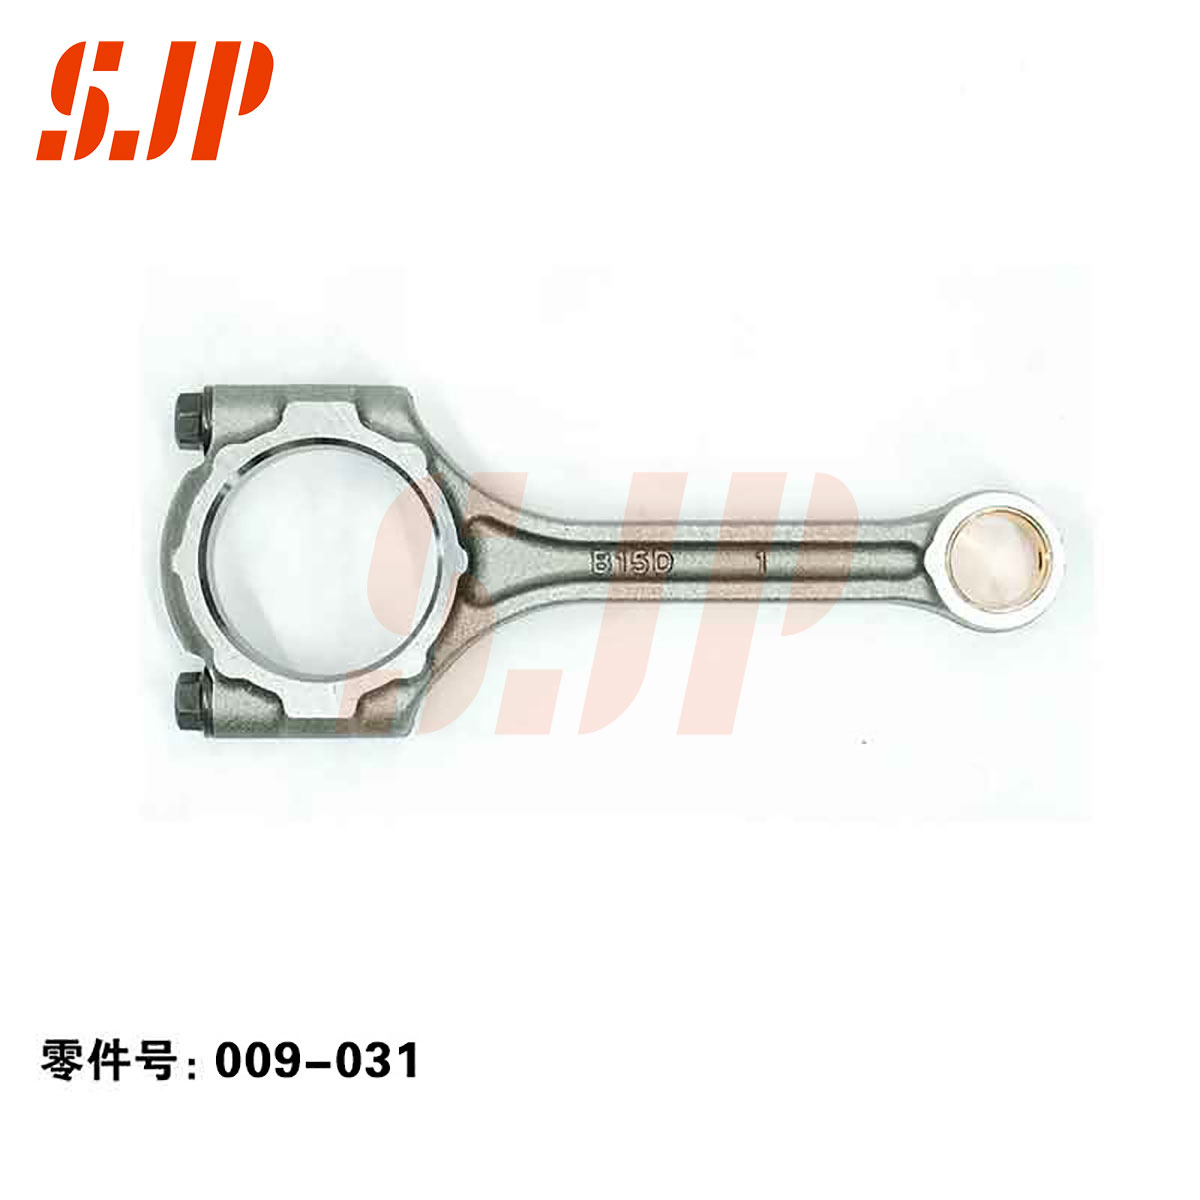 SJ-009-031 Connecting Rod For SGMW B15